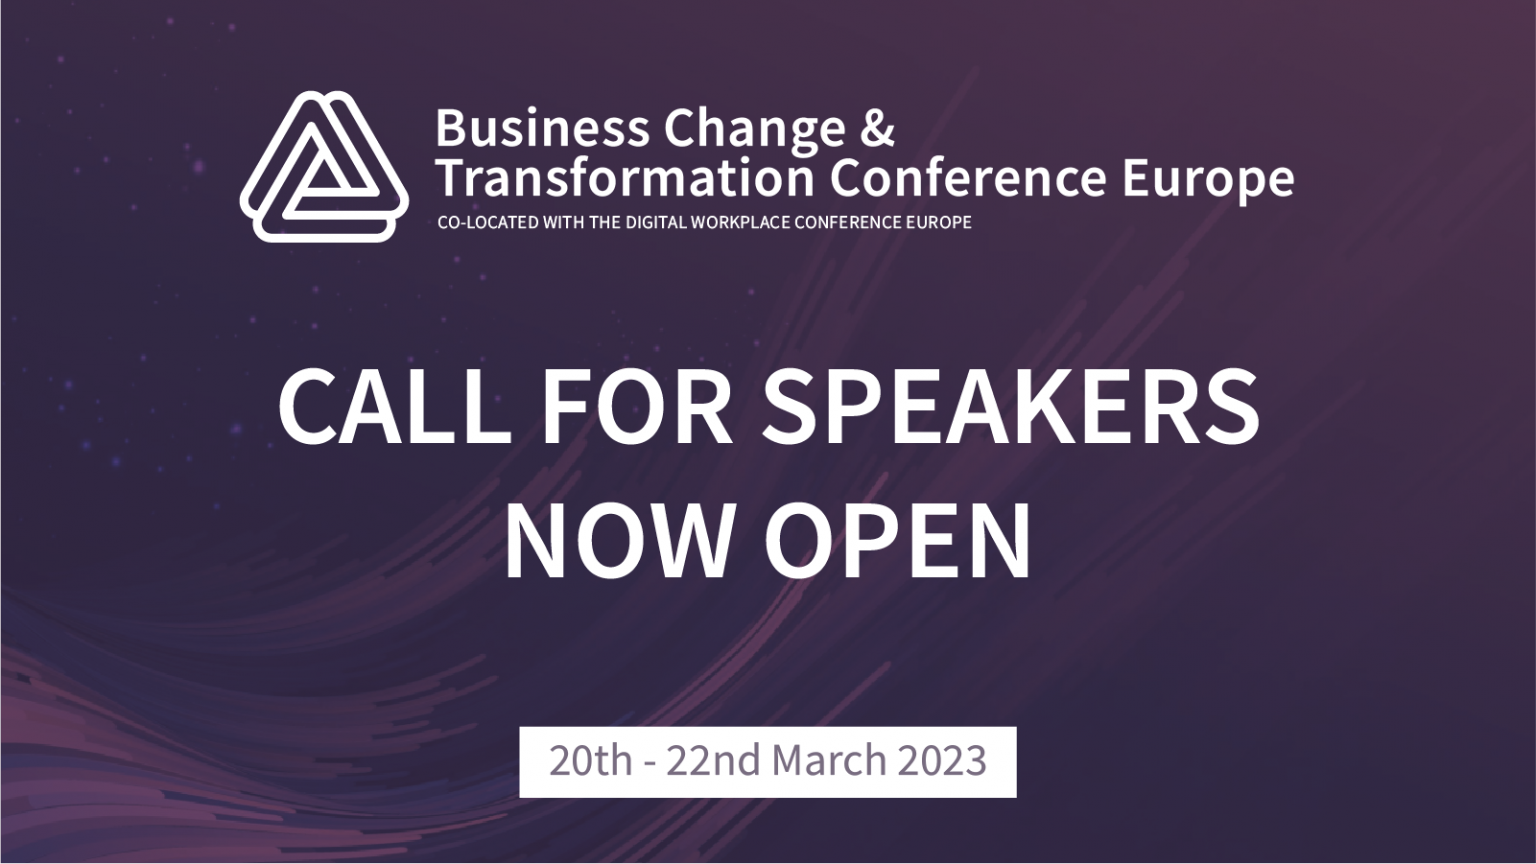 Business Change and Transformation Conference Europe 2023 will be co